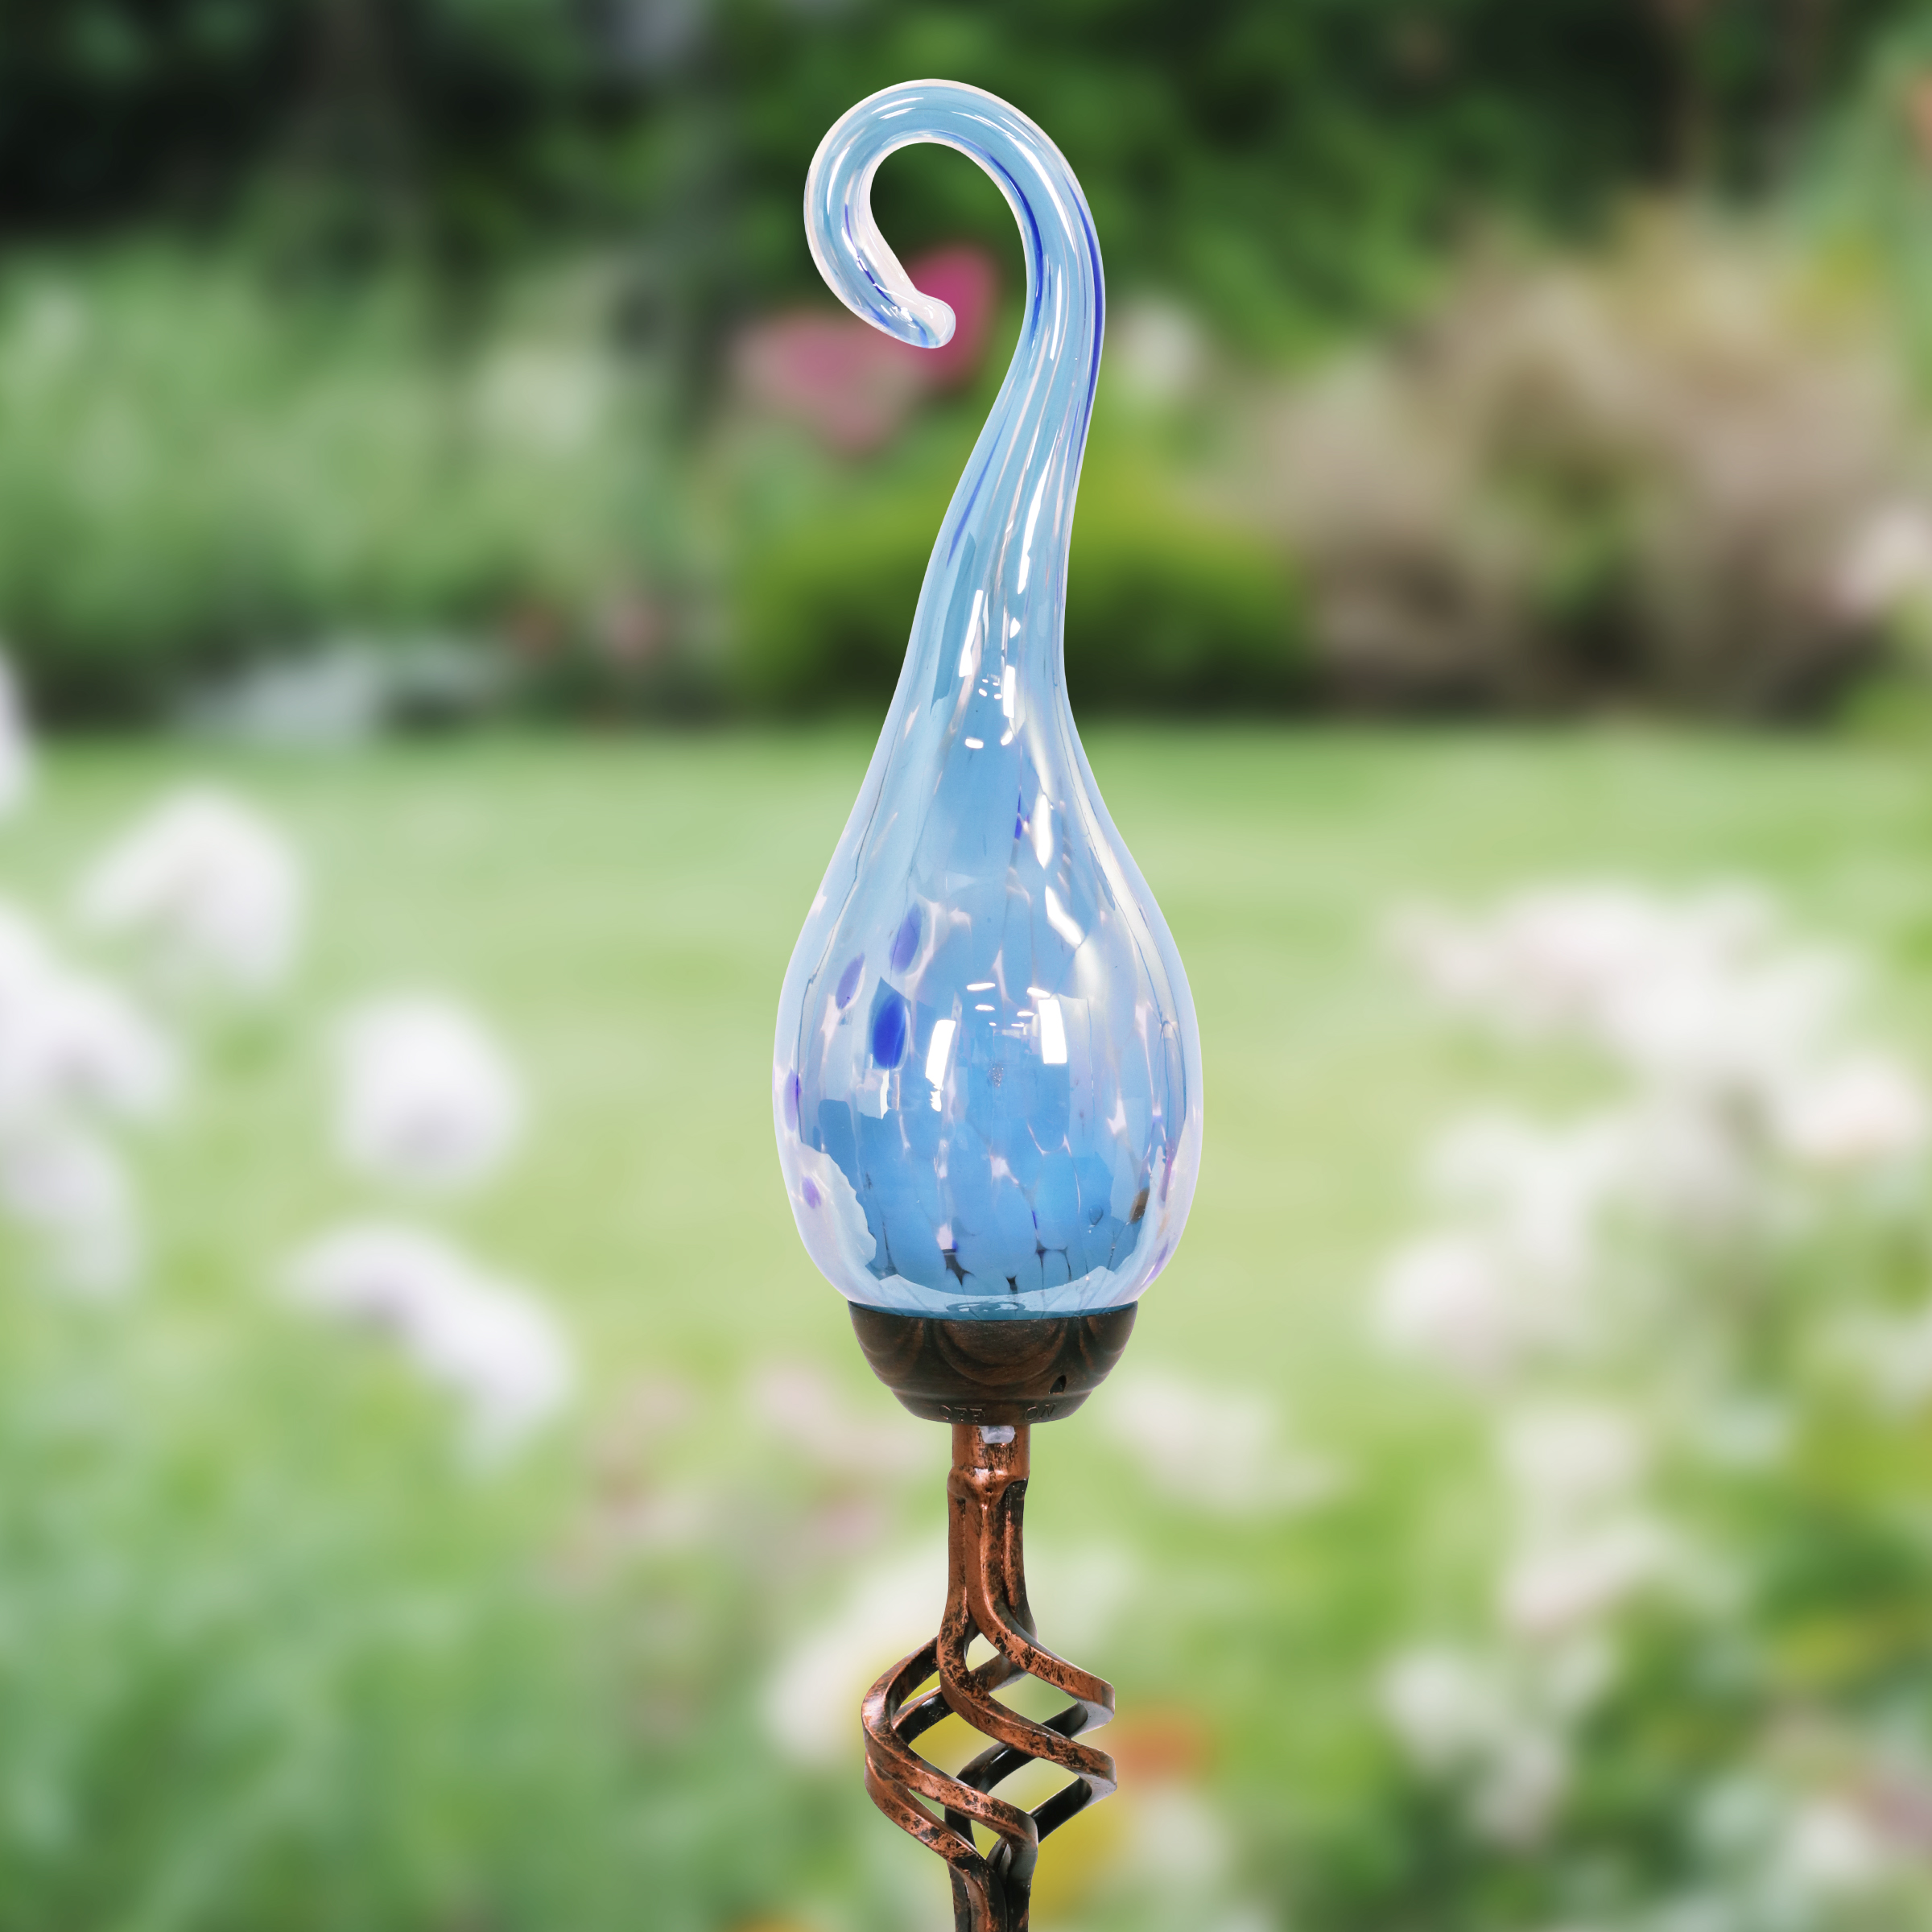 Exhart Light Blue Glass Spiral Flame  Solar Powered Garden Stake, 36 inch (Decor for Home Patio, Outdoor Garden, Yard or Lawn), Metal, Teal - image 4 of 7